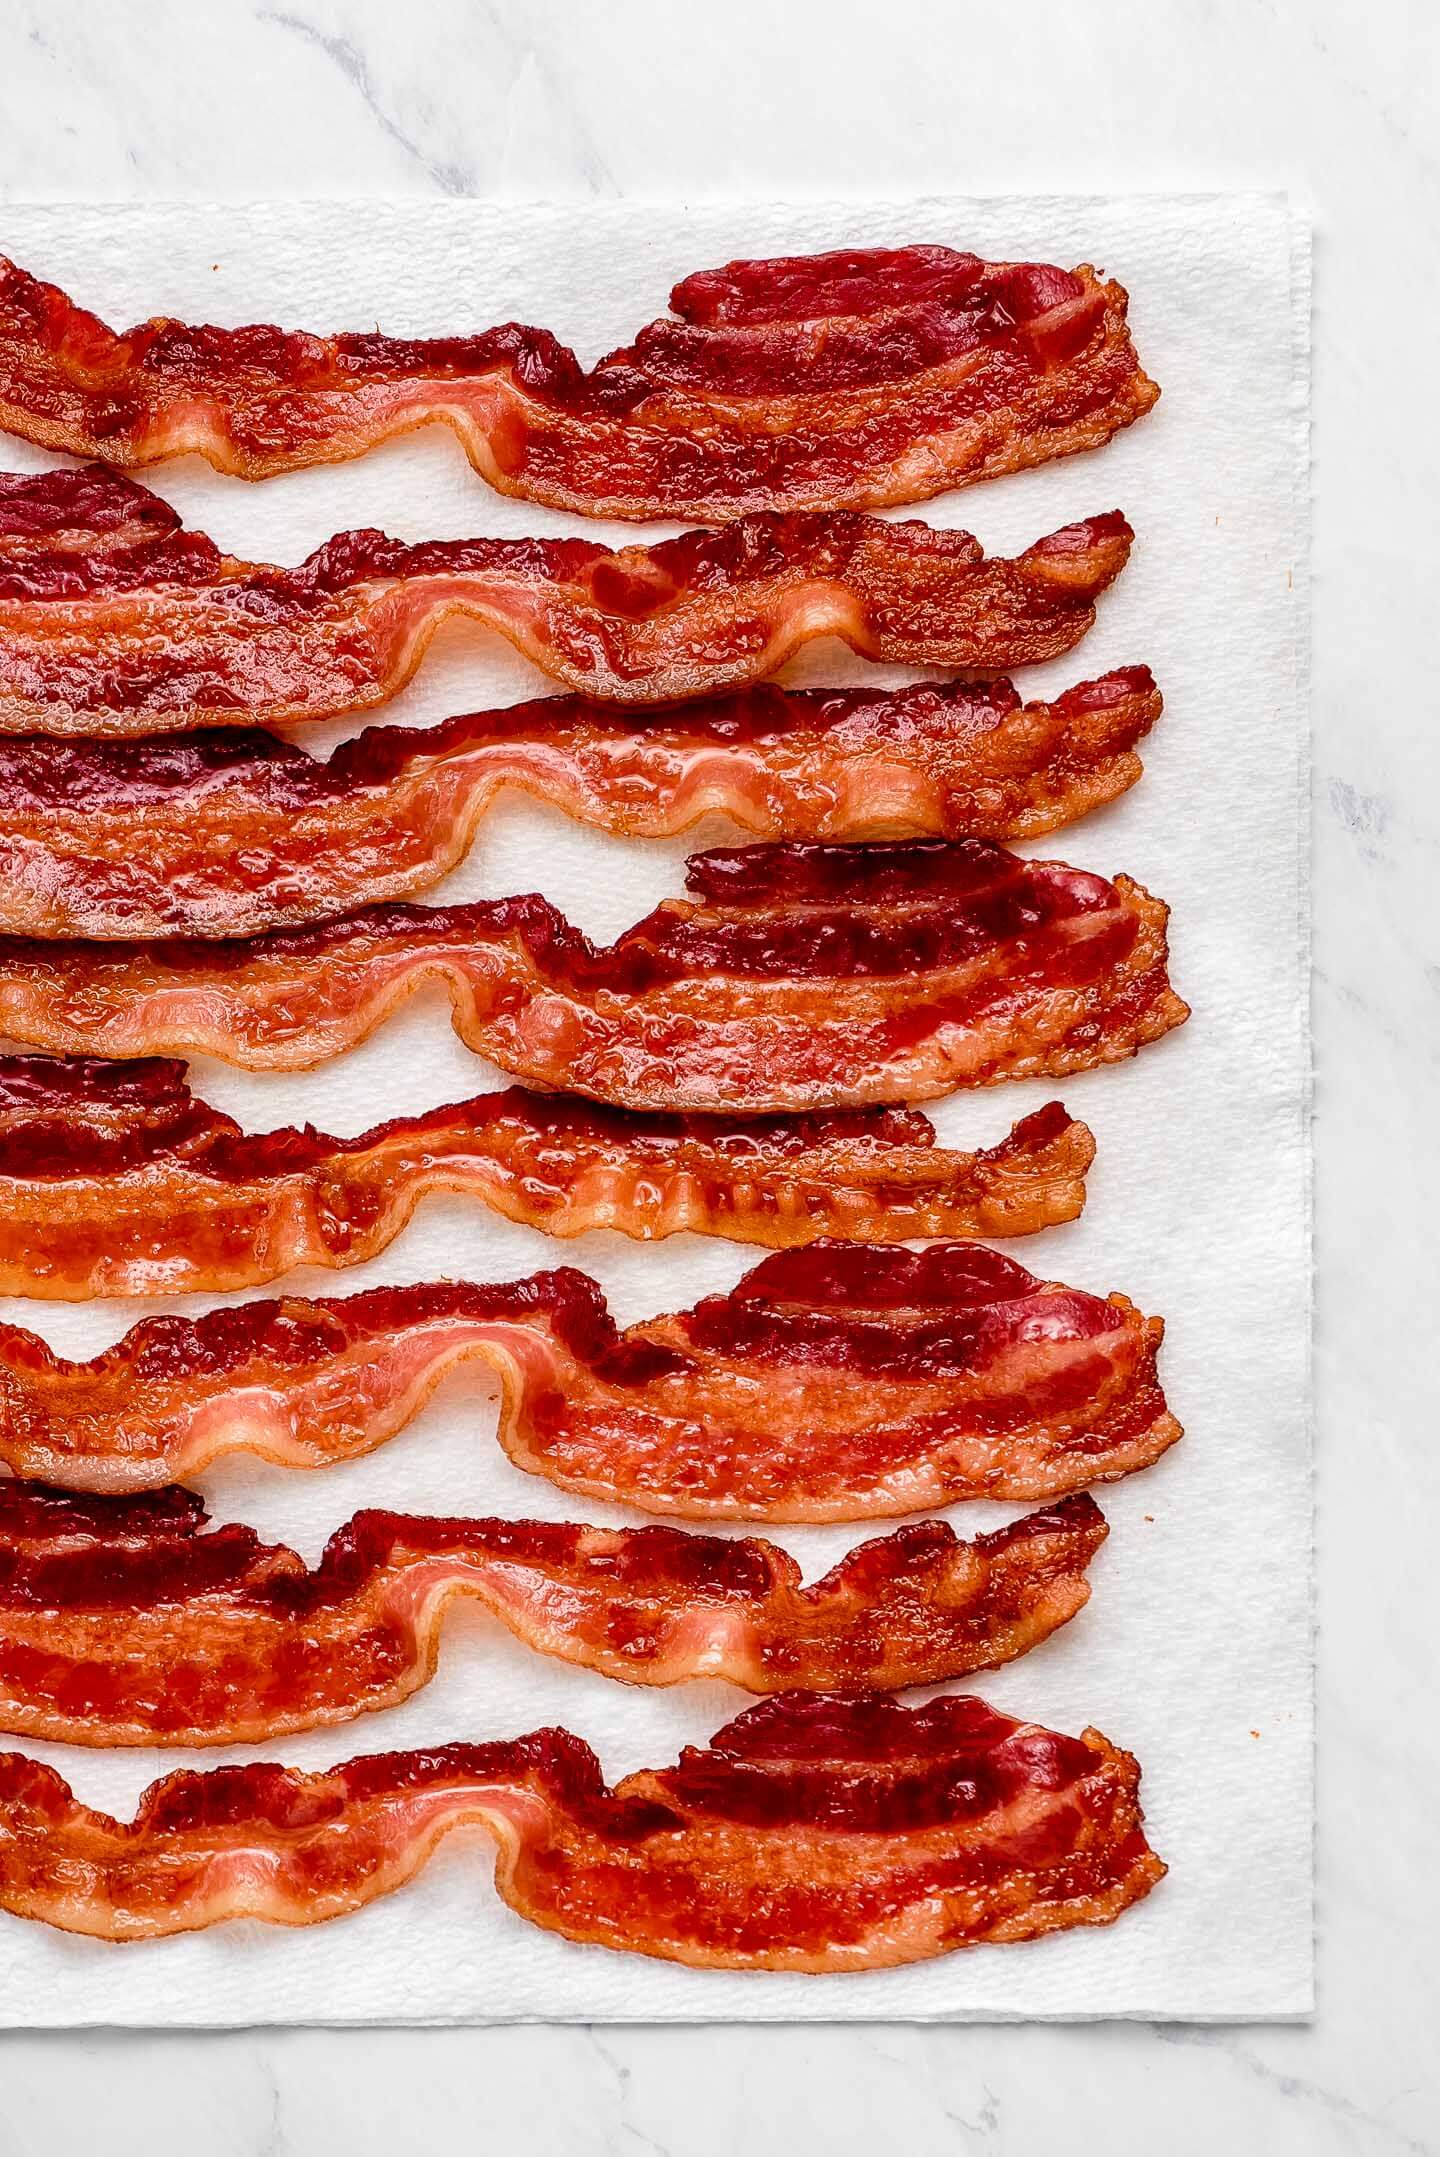 Sliced of Baked Bacon on a paper towel.